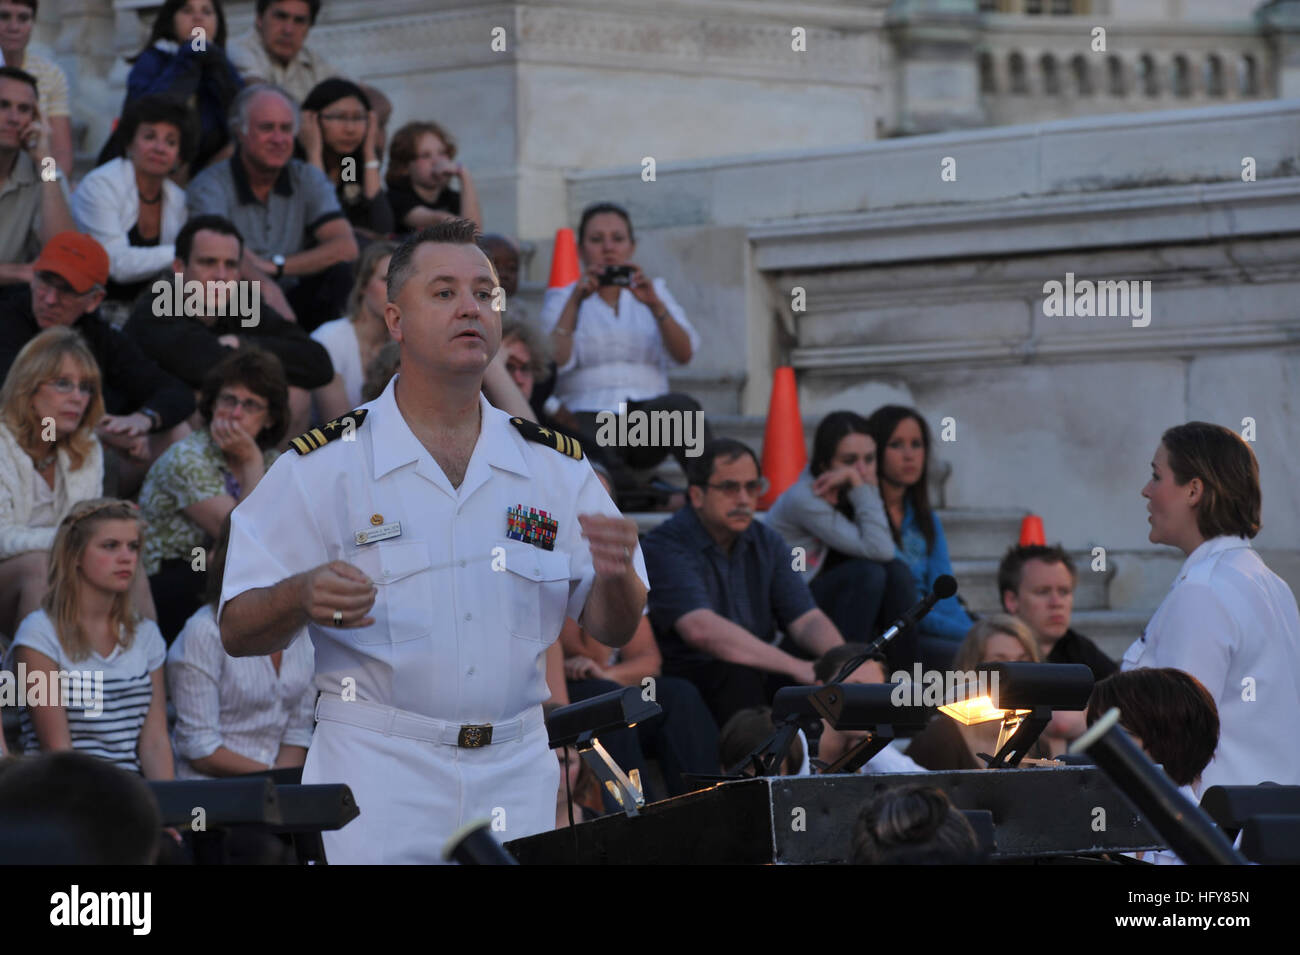 100607-N-0773H-063 WASHINGTON, D.C. (June 7, 2010) Lt. Cmdr. Brian O. Walden, commanding officer of the U.S. Navy Band, conducts the Concert Band during an evening concert at the U.S. Capitol. Every Monday evening from Memorial Day to Labor Day, units of the U.S. Navy Band present their annual summer concert series on the west steps of the U.S. Capitol in Washington, D.C. (U.S. Navy photo by Chief Musician Stephen Hassay/Released) US Navy 100607-N-0773H-063 Lt. Cmdr. Brian O. Walden, commanding officer of the U.S. Navy Band, conducts the Concert Band during an evening concert at the U.S. Capit Stock Photo